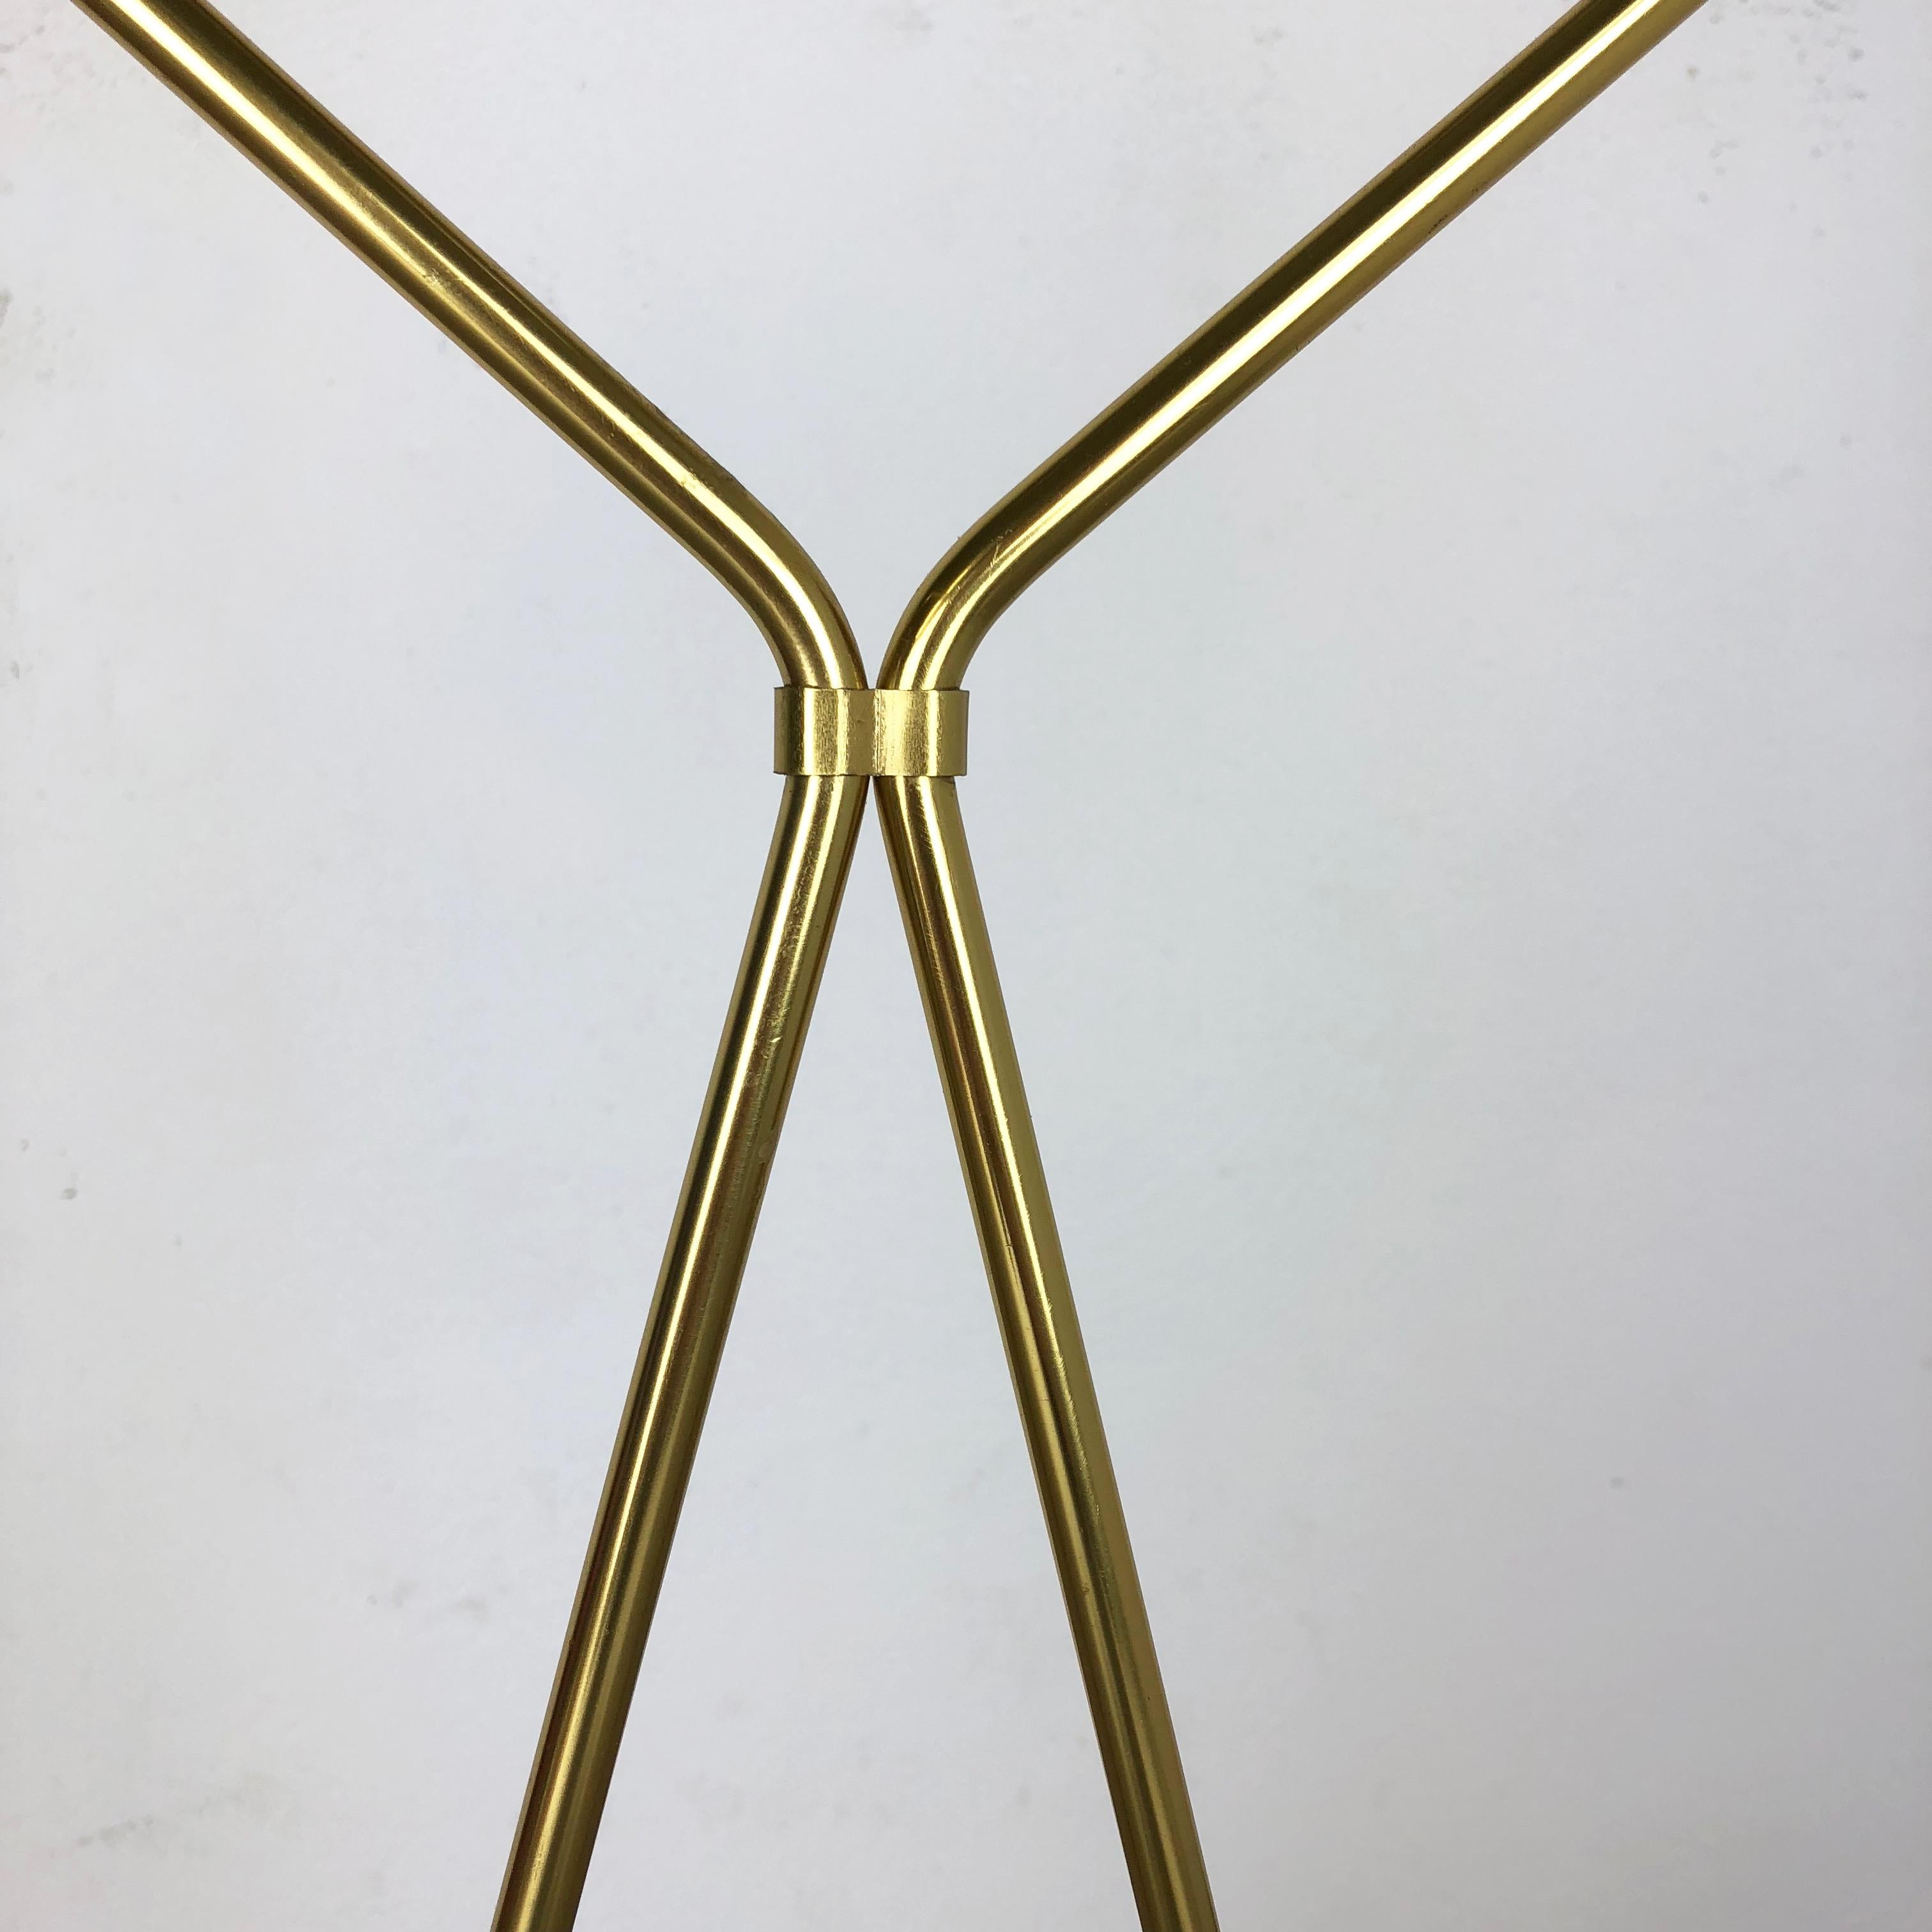 Midcentury Metal Brass Umbrella Stand, Germany, 1950s, Nr. 1 In Good Condition For Sale In Kirchlengern, DE